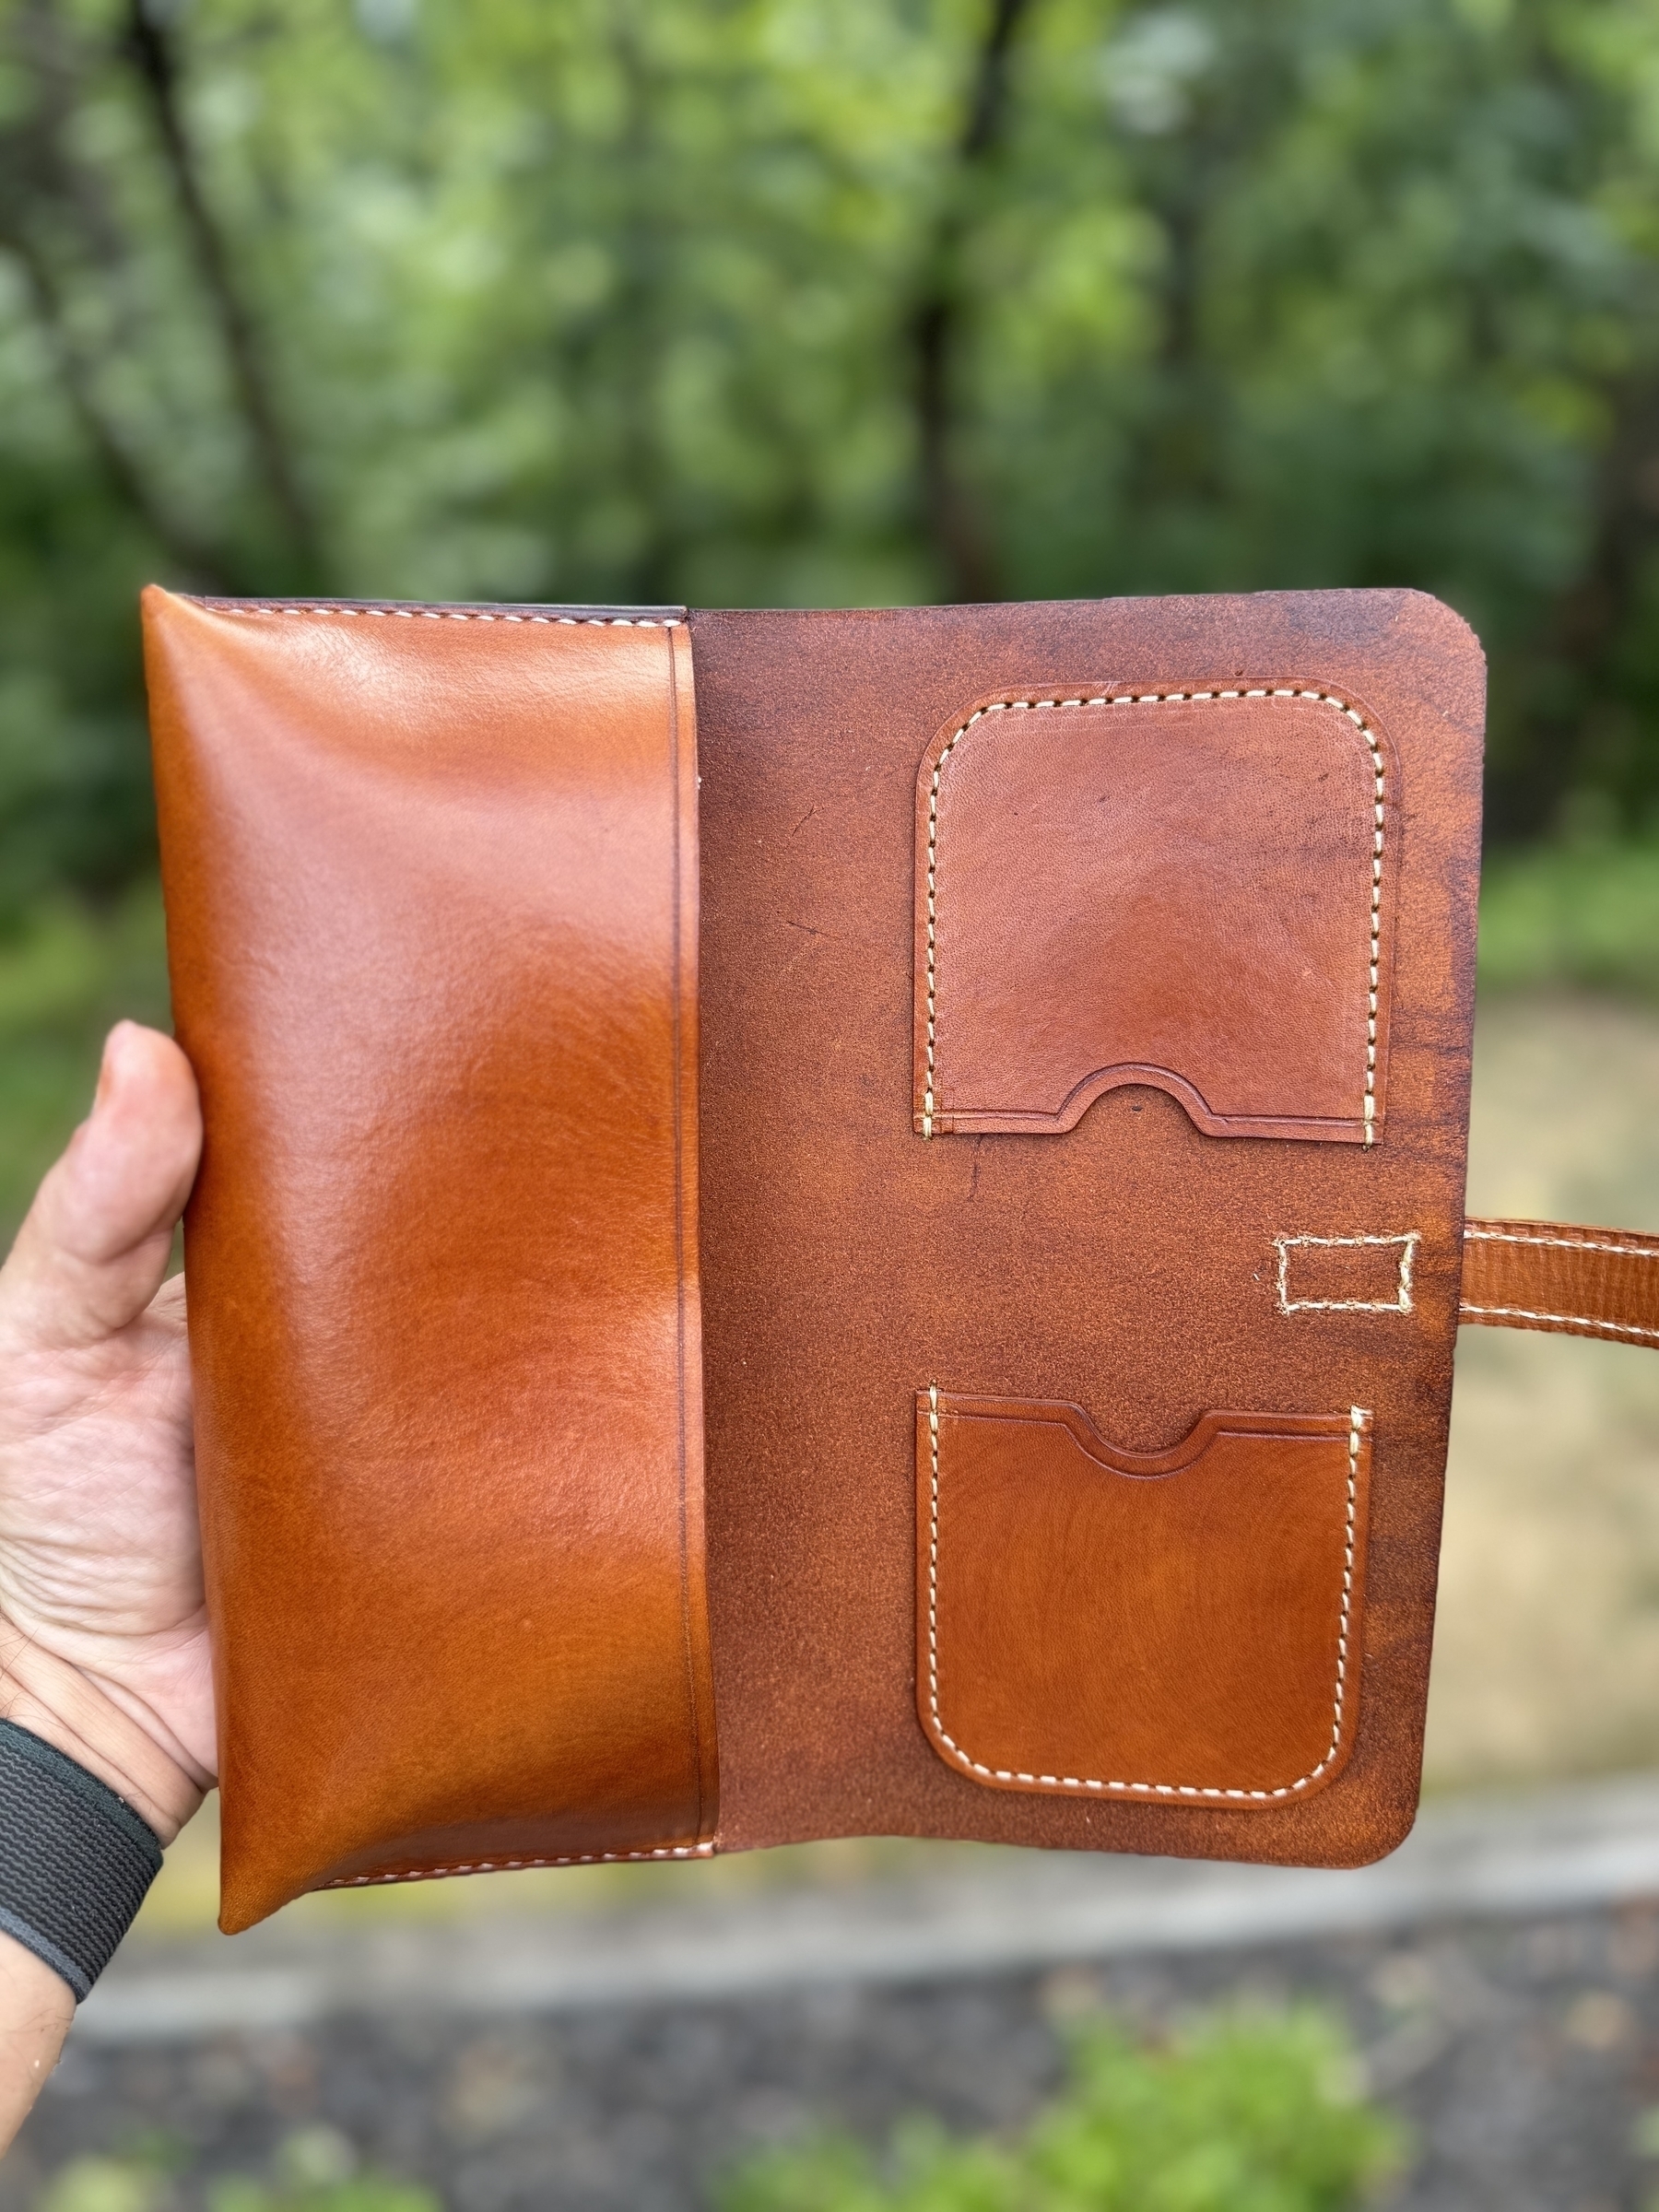 A hand is holding an open brown leather cigar case with multiple compartments, in an outdoor setting with greenery in the background.